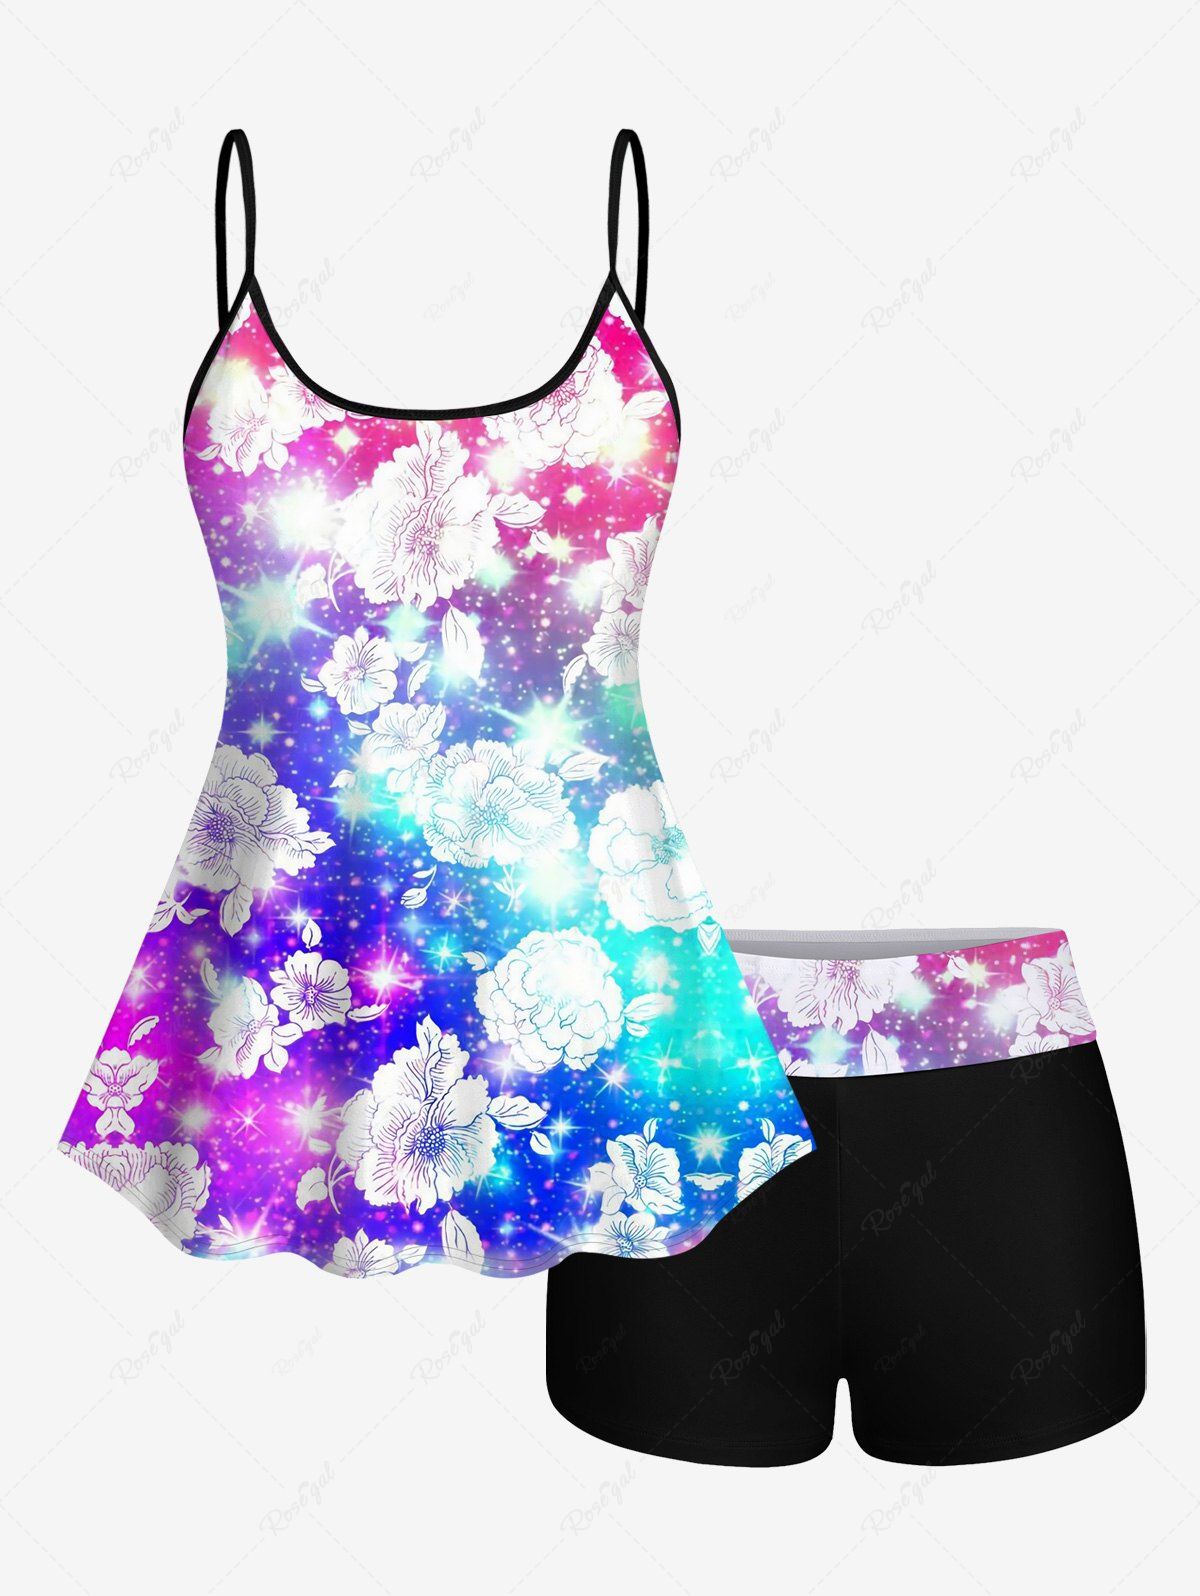 Affordable Glitter Sparkling Ombre Galaxy Floral Print Boyleg Tankini Swimsuit (Adjustable Shoulder Strap)  